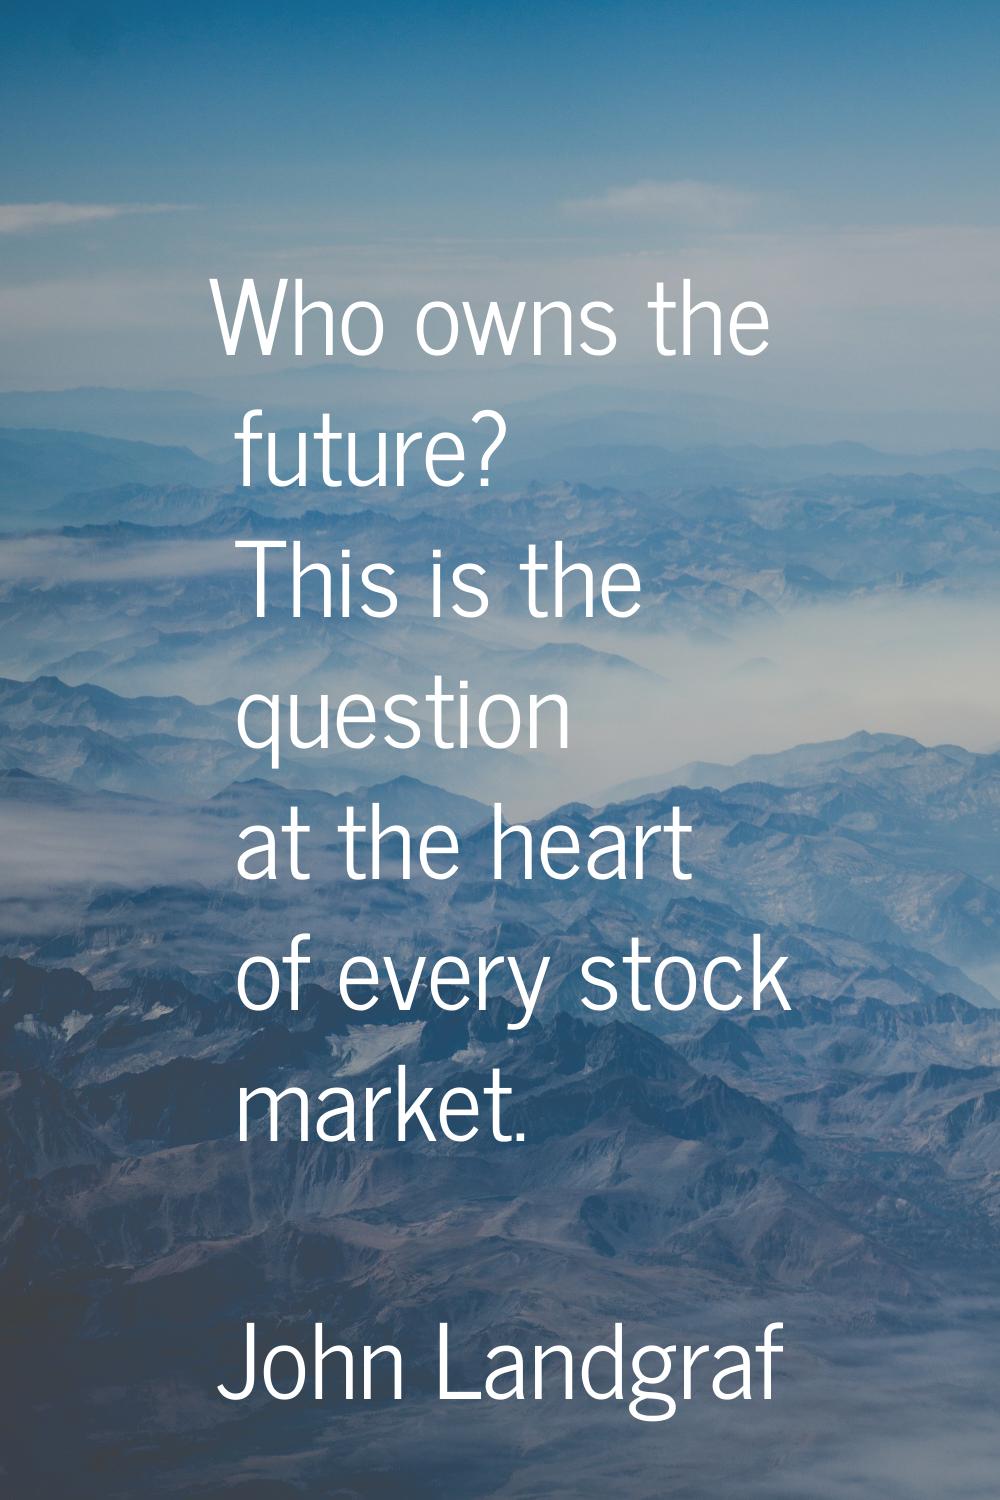 Who owns the future? This is the question at the heart of every stock market.